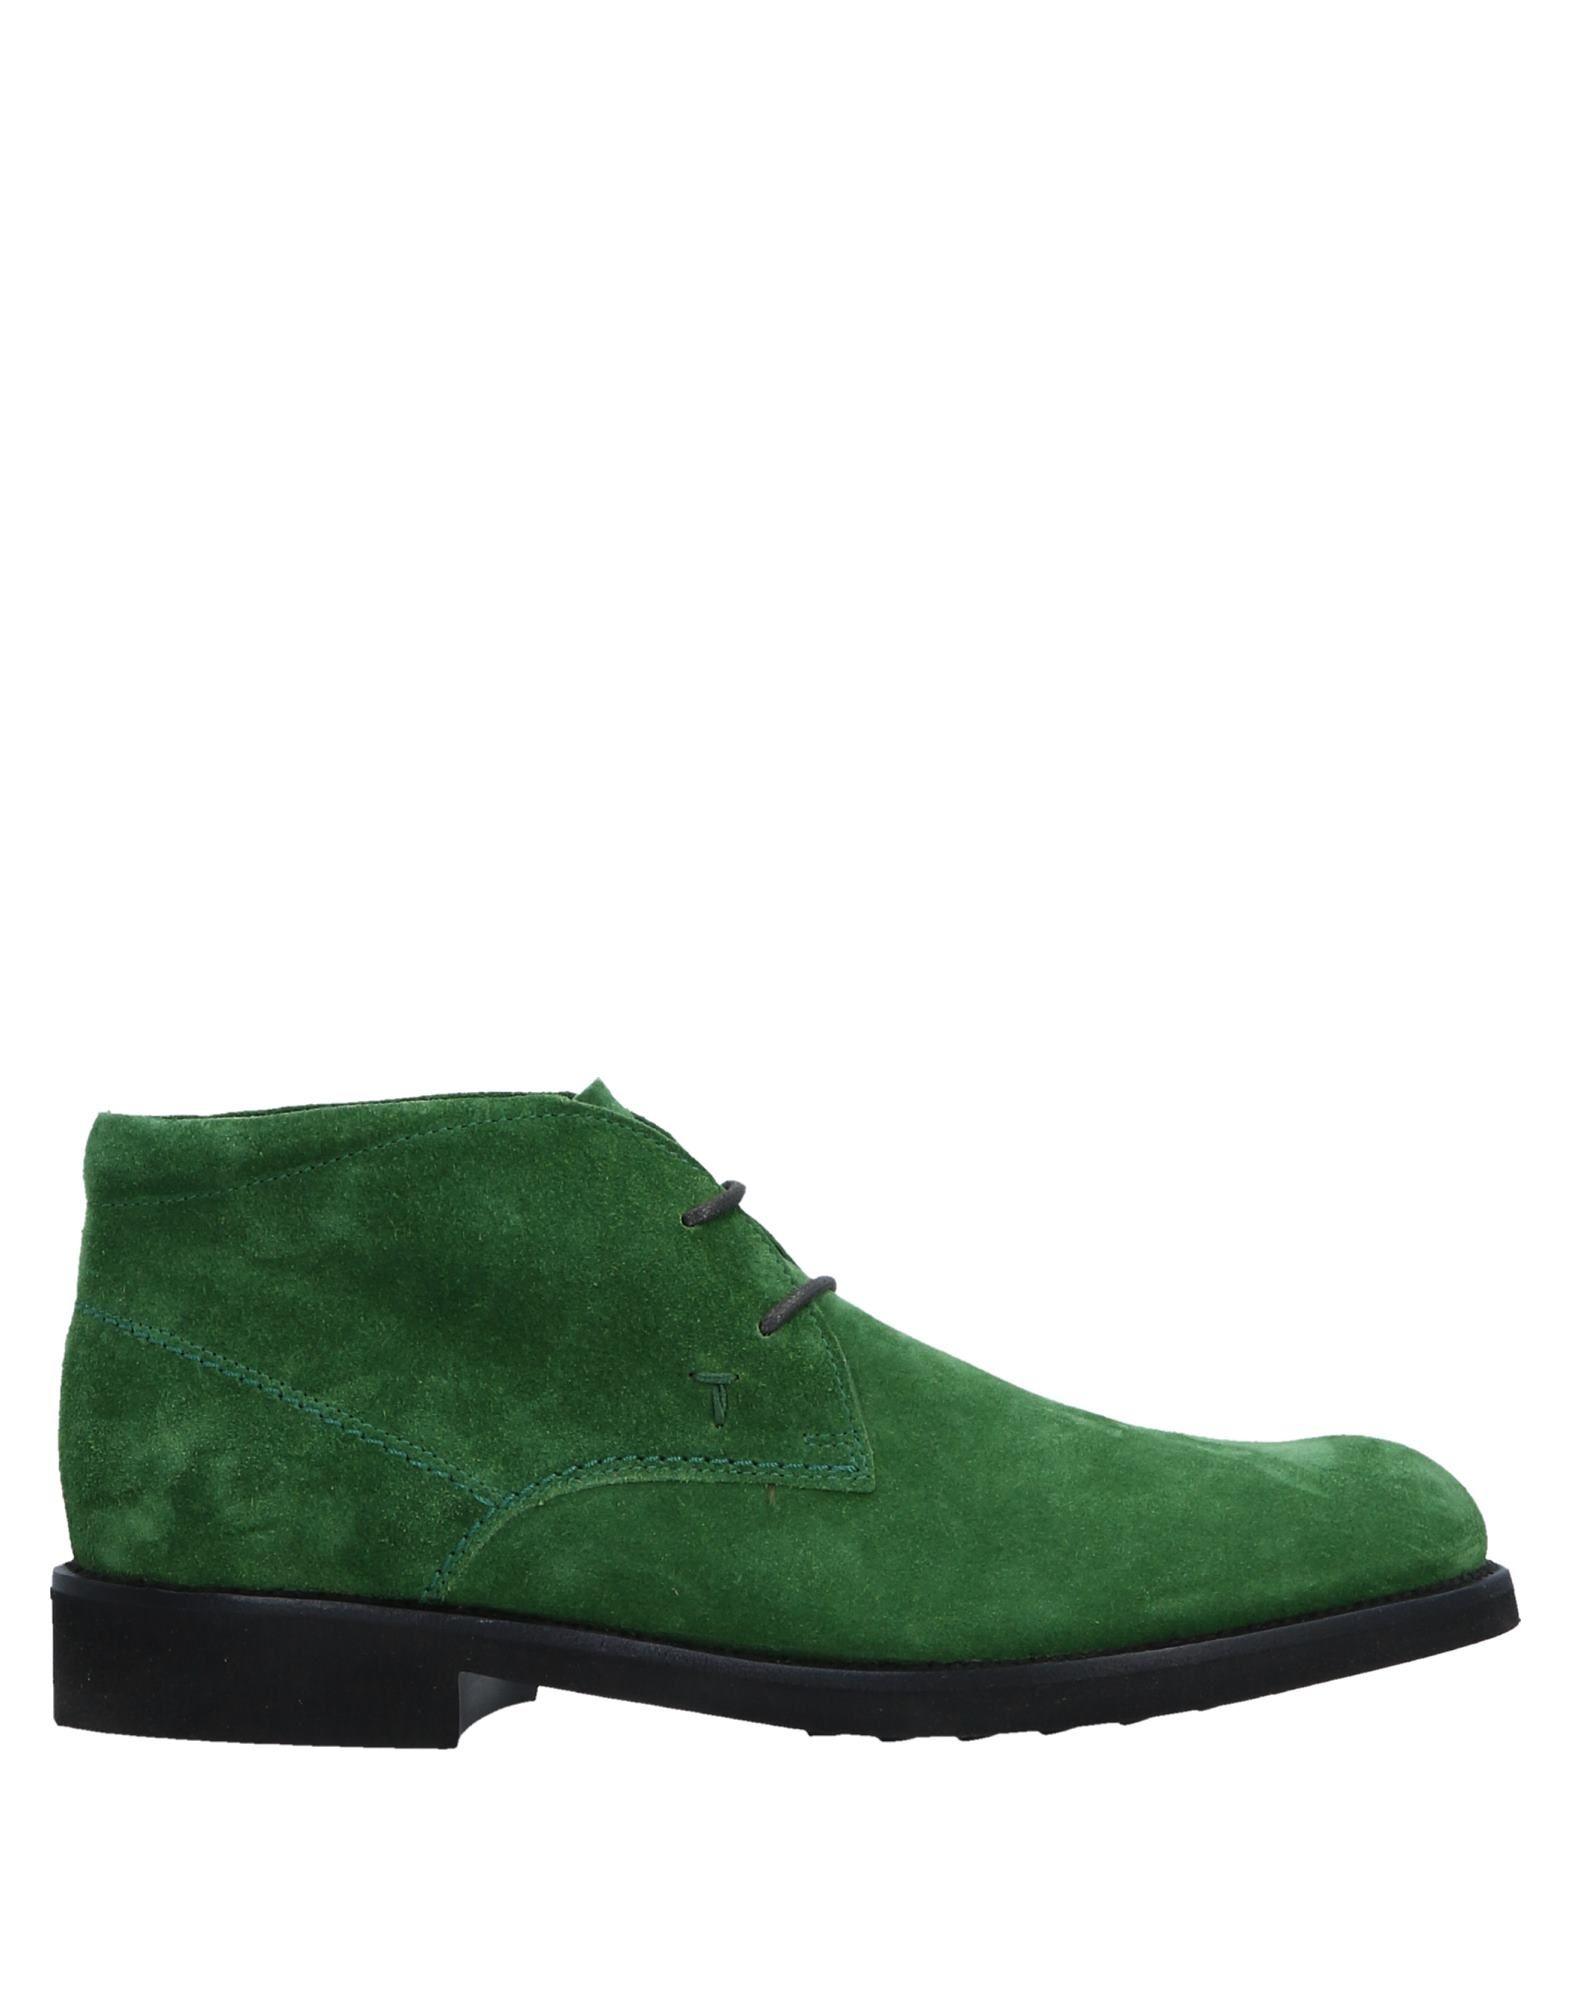 Tod's Leather Ankle Boots in Green for Men - Lyst